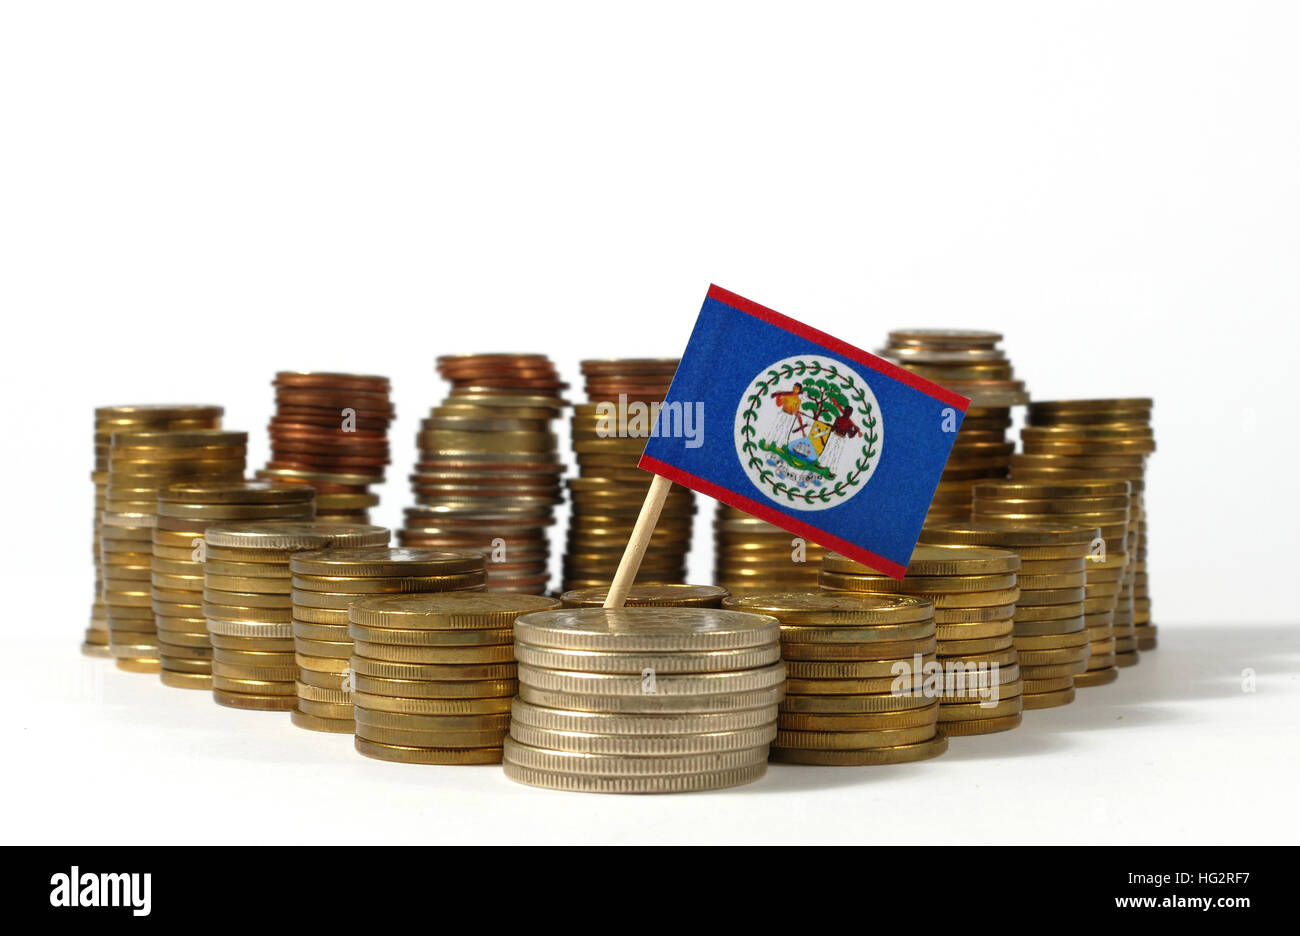 Belize flag waving with stack of money coins Stock Photo